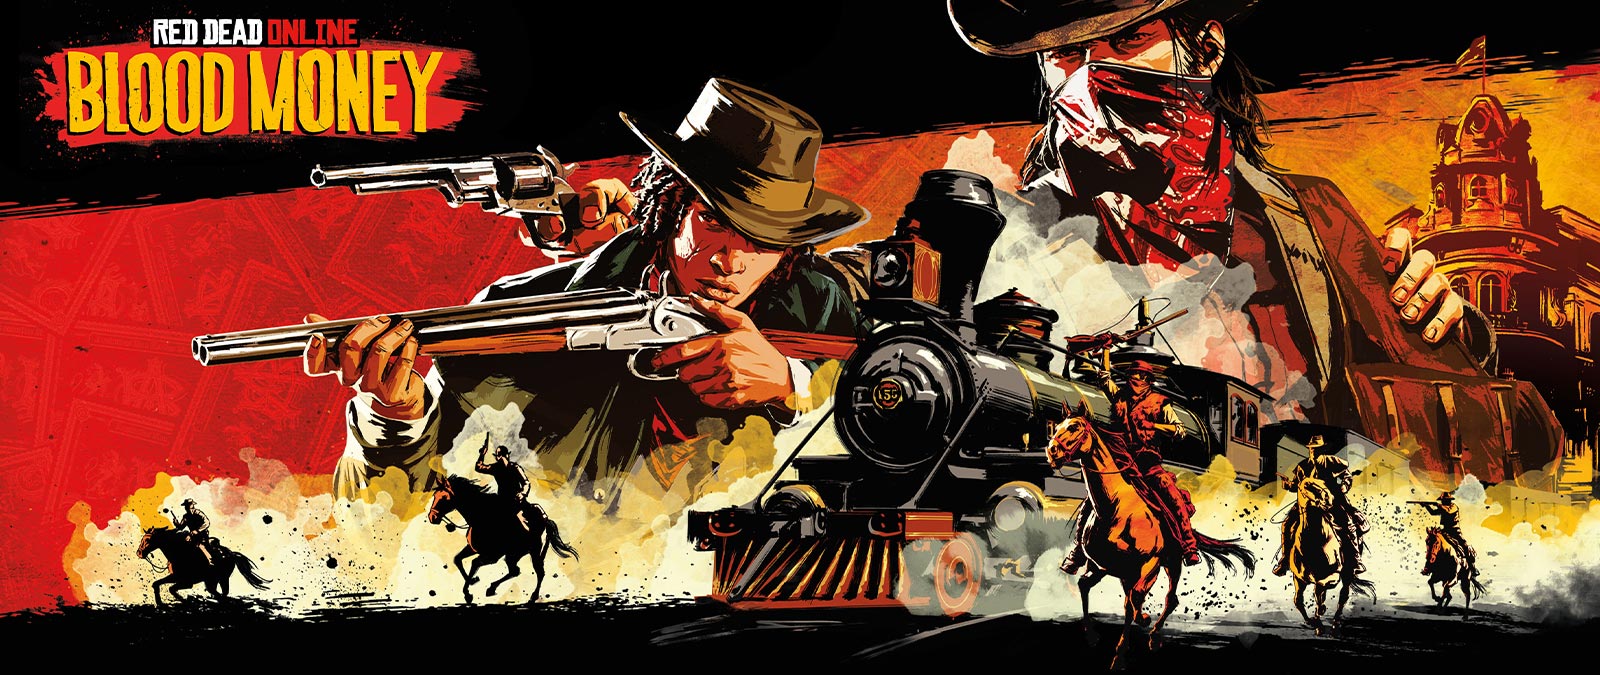 Red Dead Online: Blood Money, armed bandits on horseback attack a train.